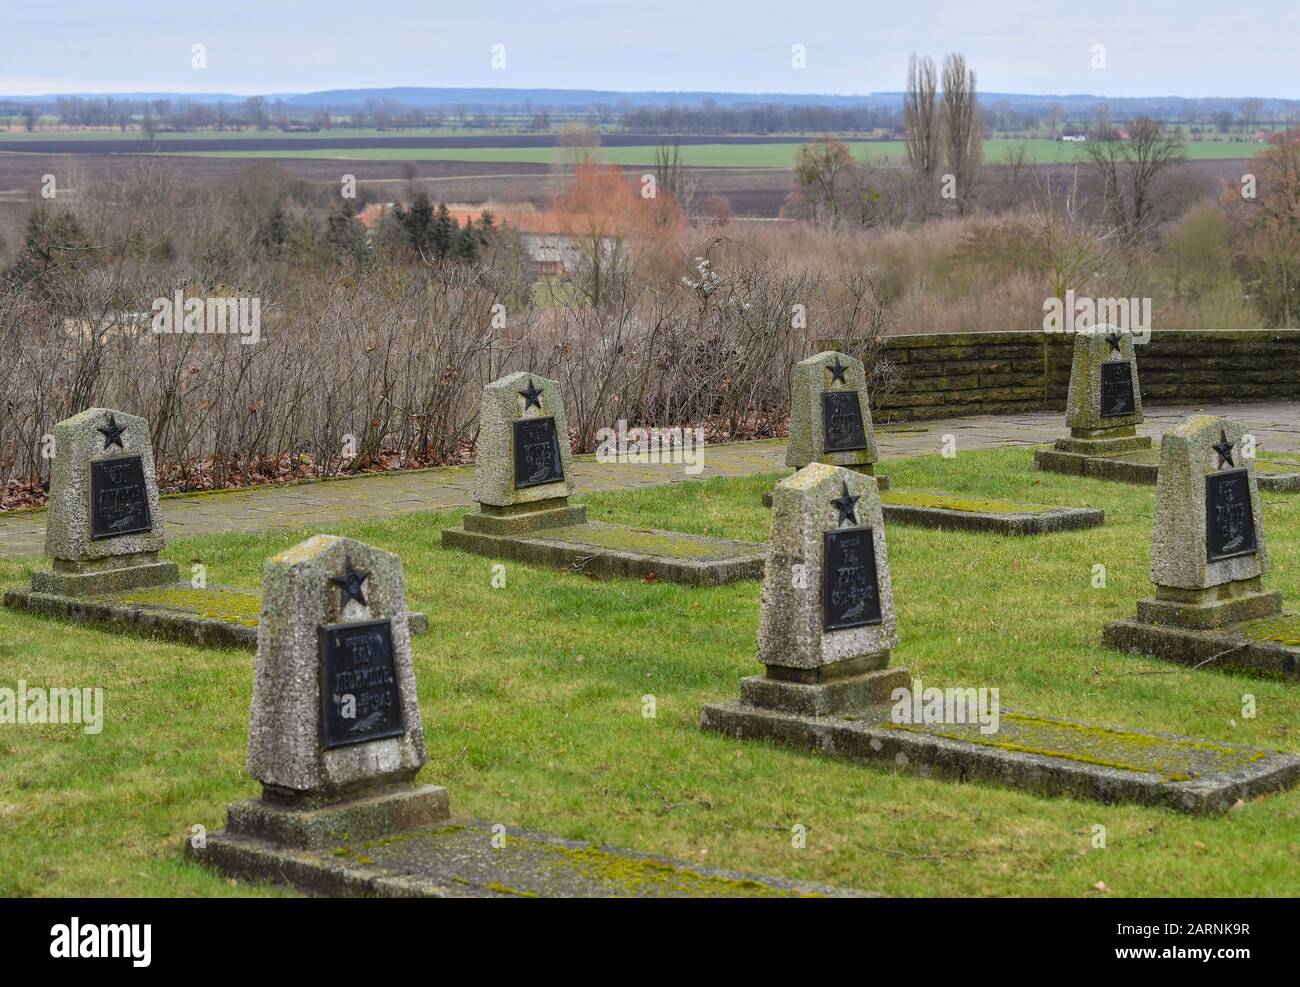 Seelow, Germany. 29th Jan, 2020. Gravestones of Soviet soldiers can be seen at the edge of the Oderbruch on the grounds of the Seelower Höhen Memorial. Shortly before the end of the Second World War, tens of thousands of soldiers and civilians died in the Battle of Seelower Heights east of Berlin in the largest battle of the Second World War on German soil. Credit: Patrick Pleul/dpa-Zentralbild/ZB/dpa/Alamy Live News Stock Photo